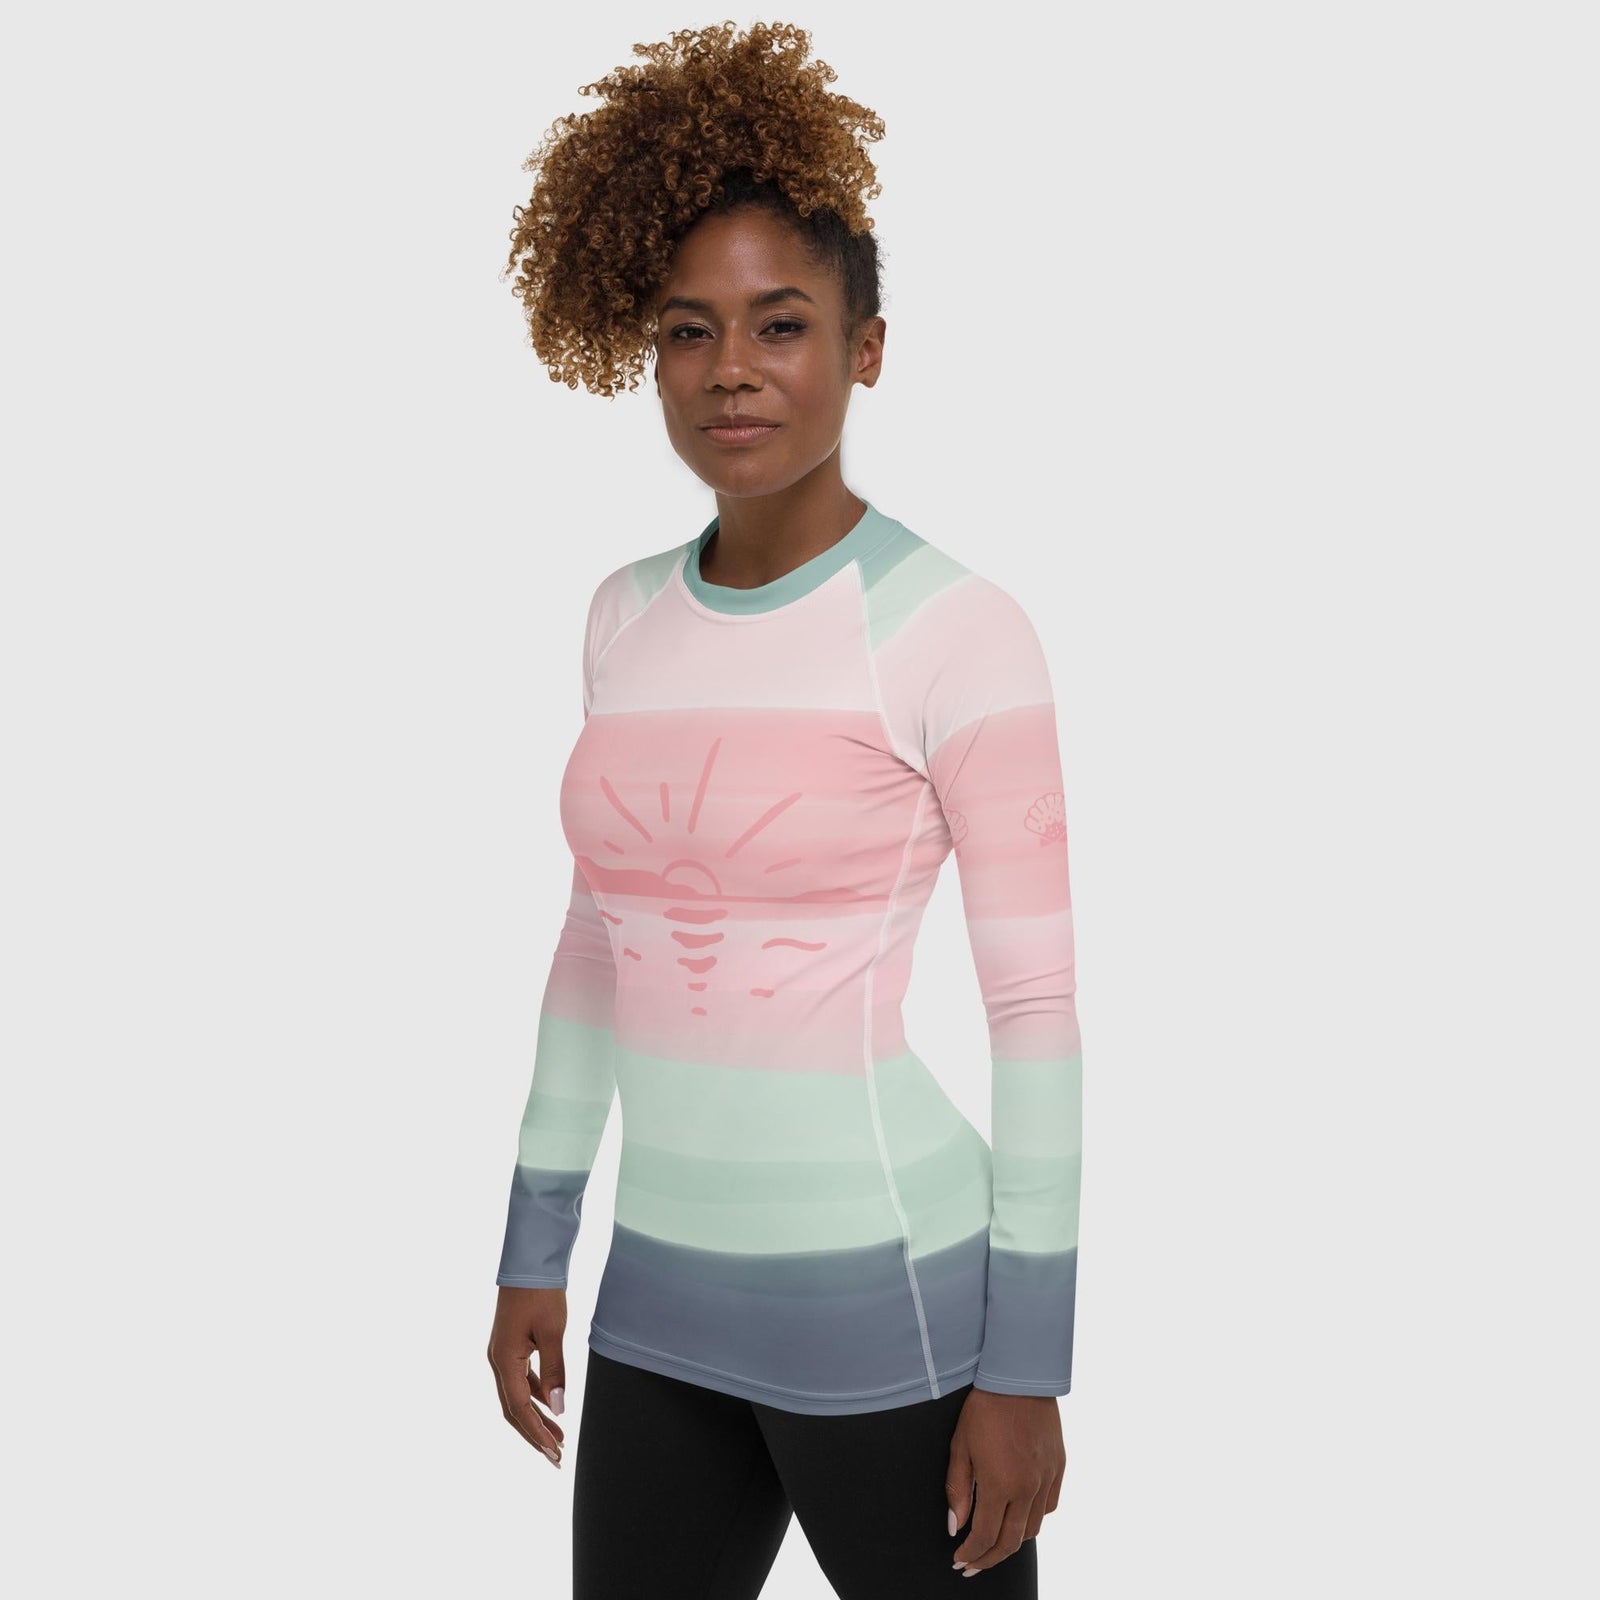 Women's Rash Guard Striped - Revive Wear     Women's Striped Rash Guard. This rainbow-striped rash guard keeps the sun off your skin during long days of paddling, swimming or beachcombing. Shop your size today.